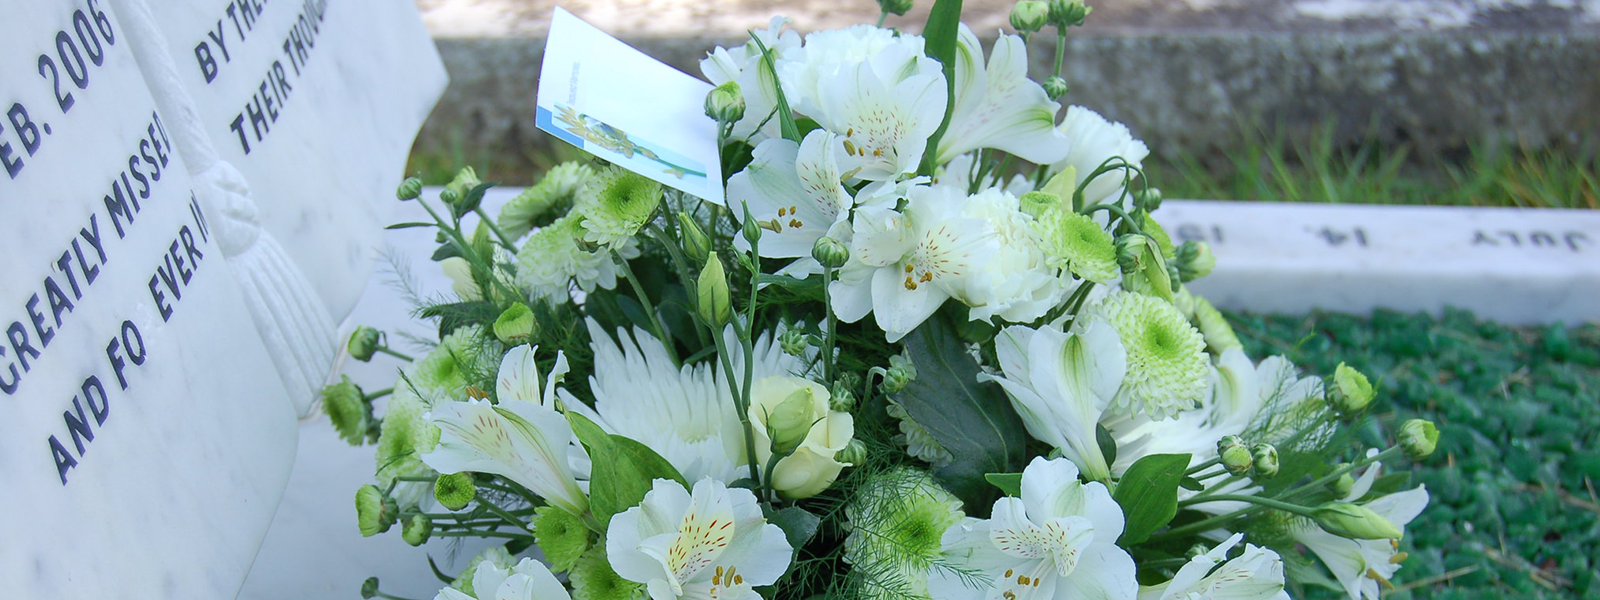 A floral tribute on a grave